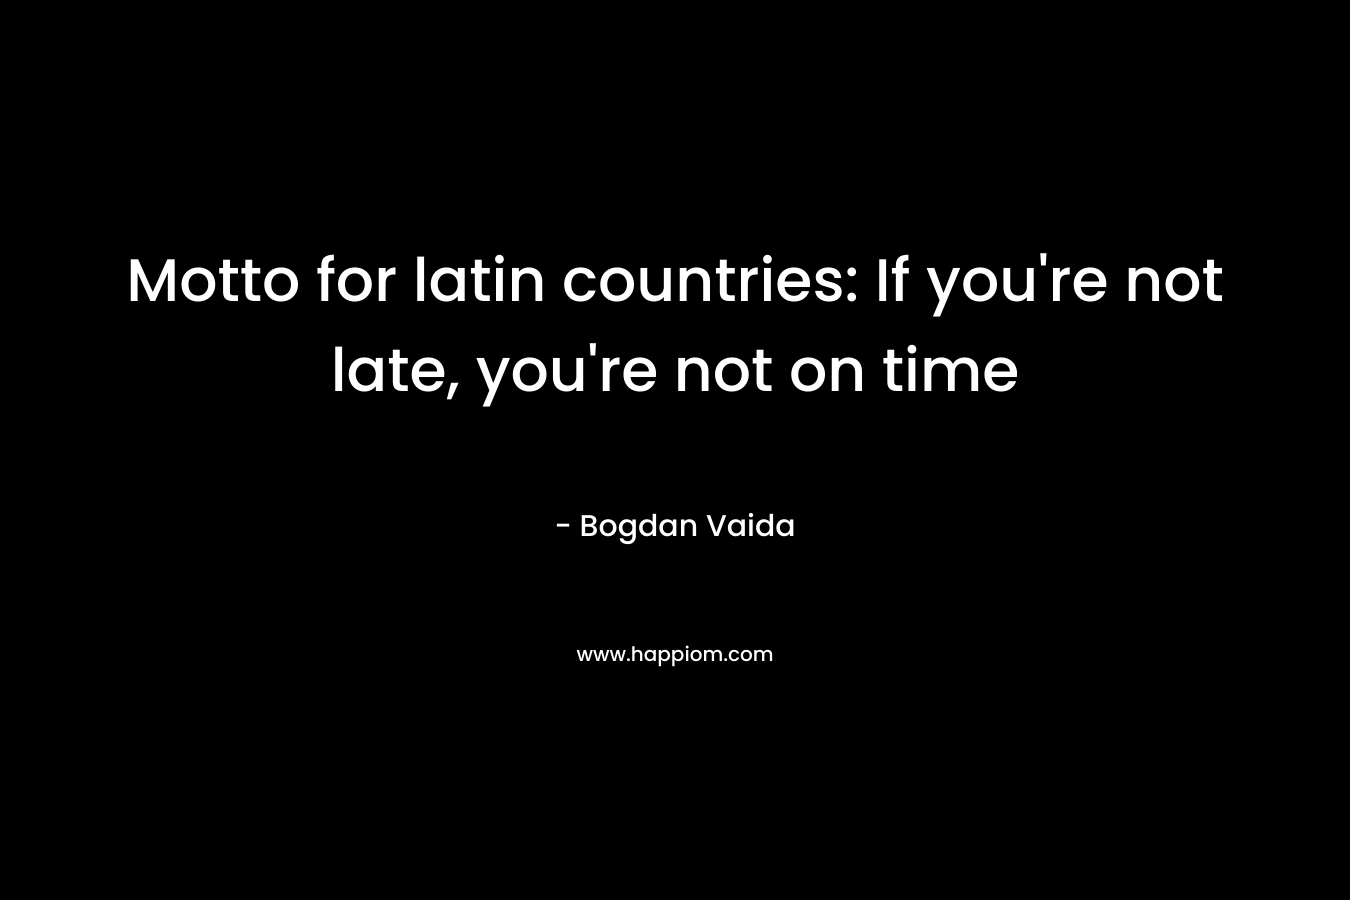 Motto for latin countries: If you're not late, you're not on time